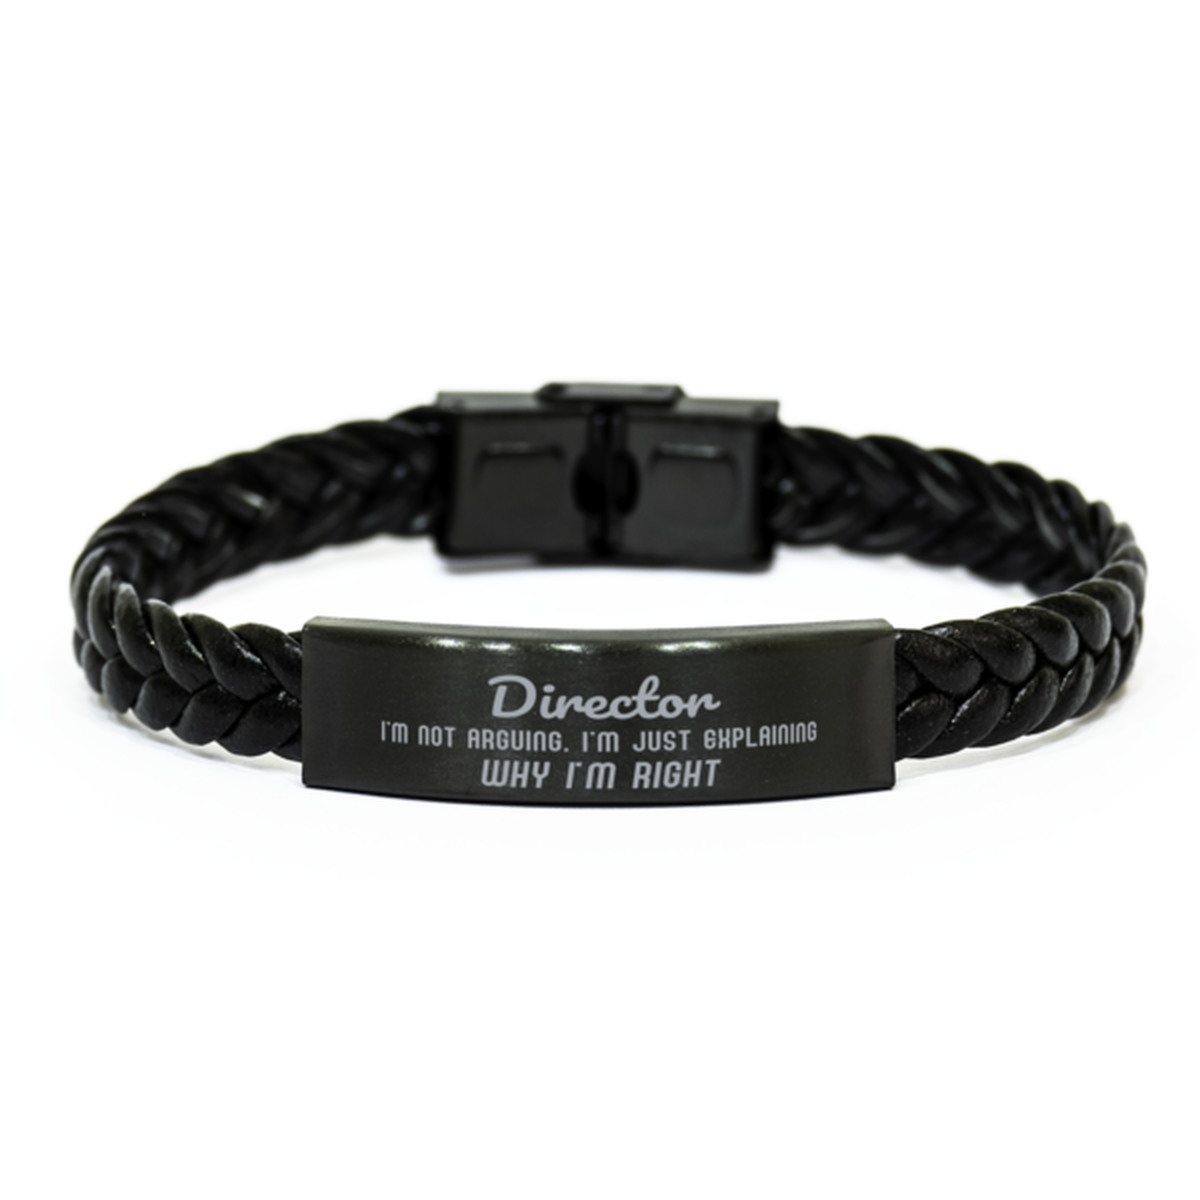 Director I'm not Arguing. I'm Just Explaining Why I'm RIGHT Braided Leather Bracelet, Graduation Birthday Christmas Director Gifts For Director Funny Saying Quote Present for Men Women Coworker